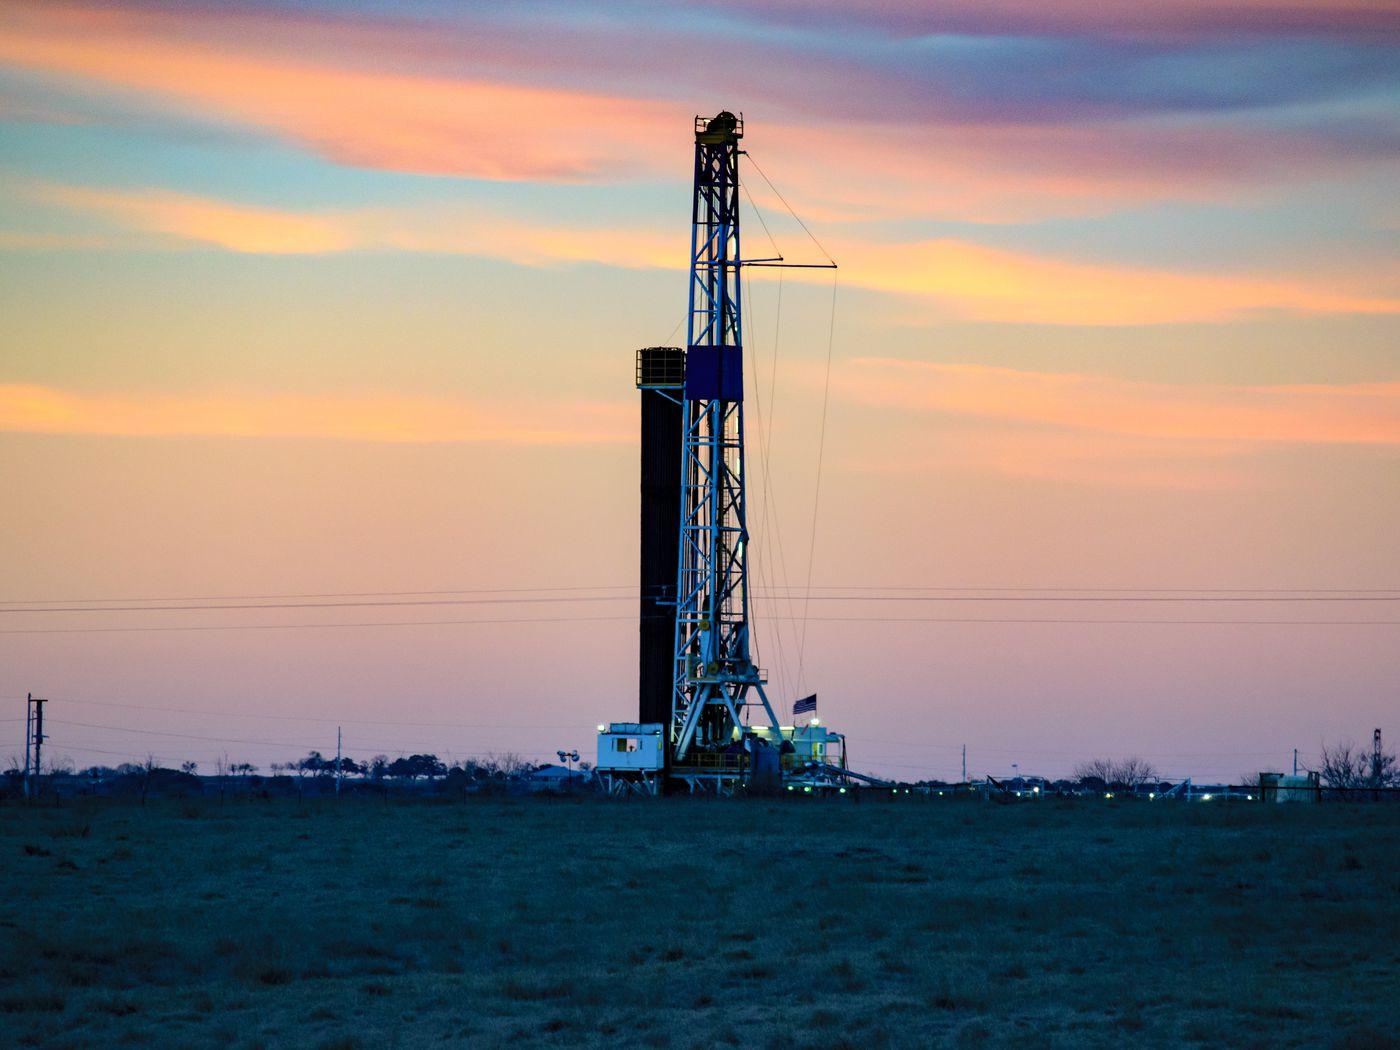 Climate change: fracking may be doing more damage than we thought